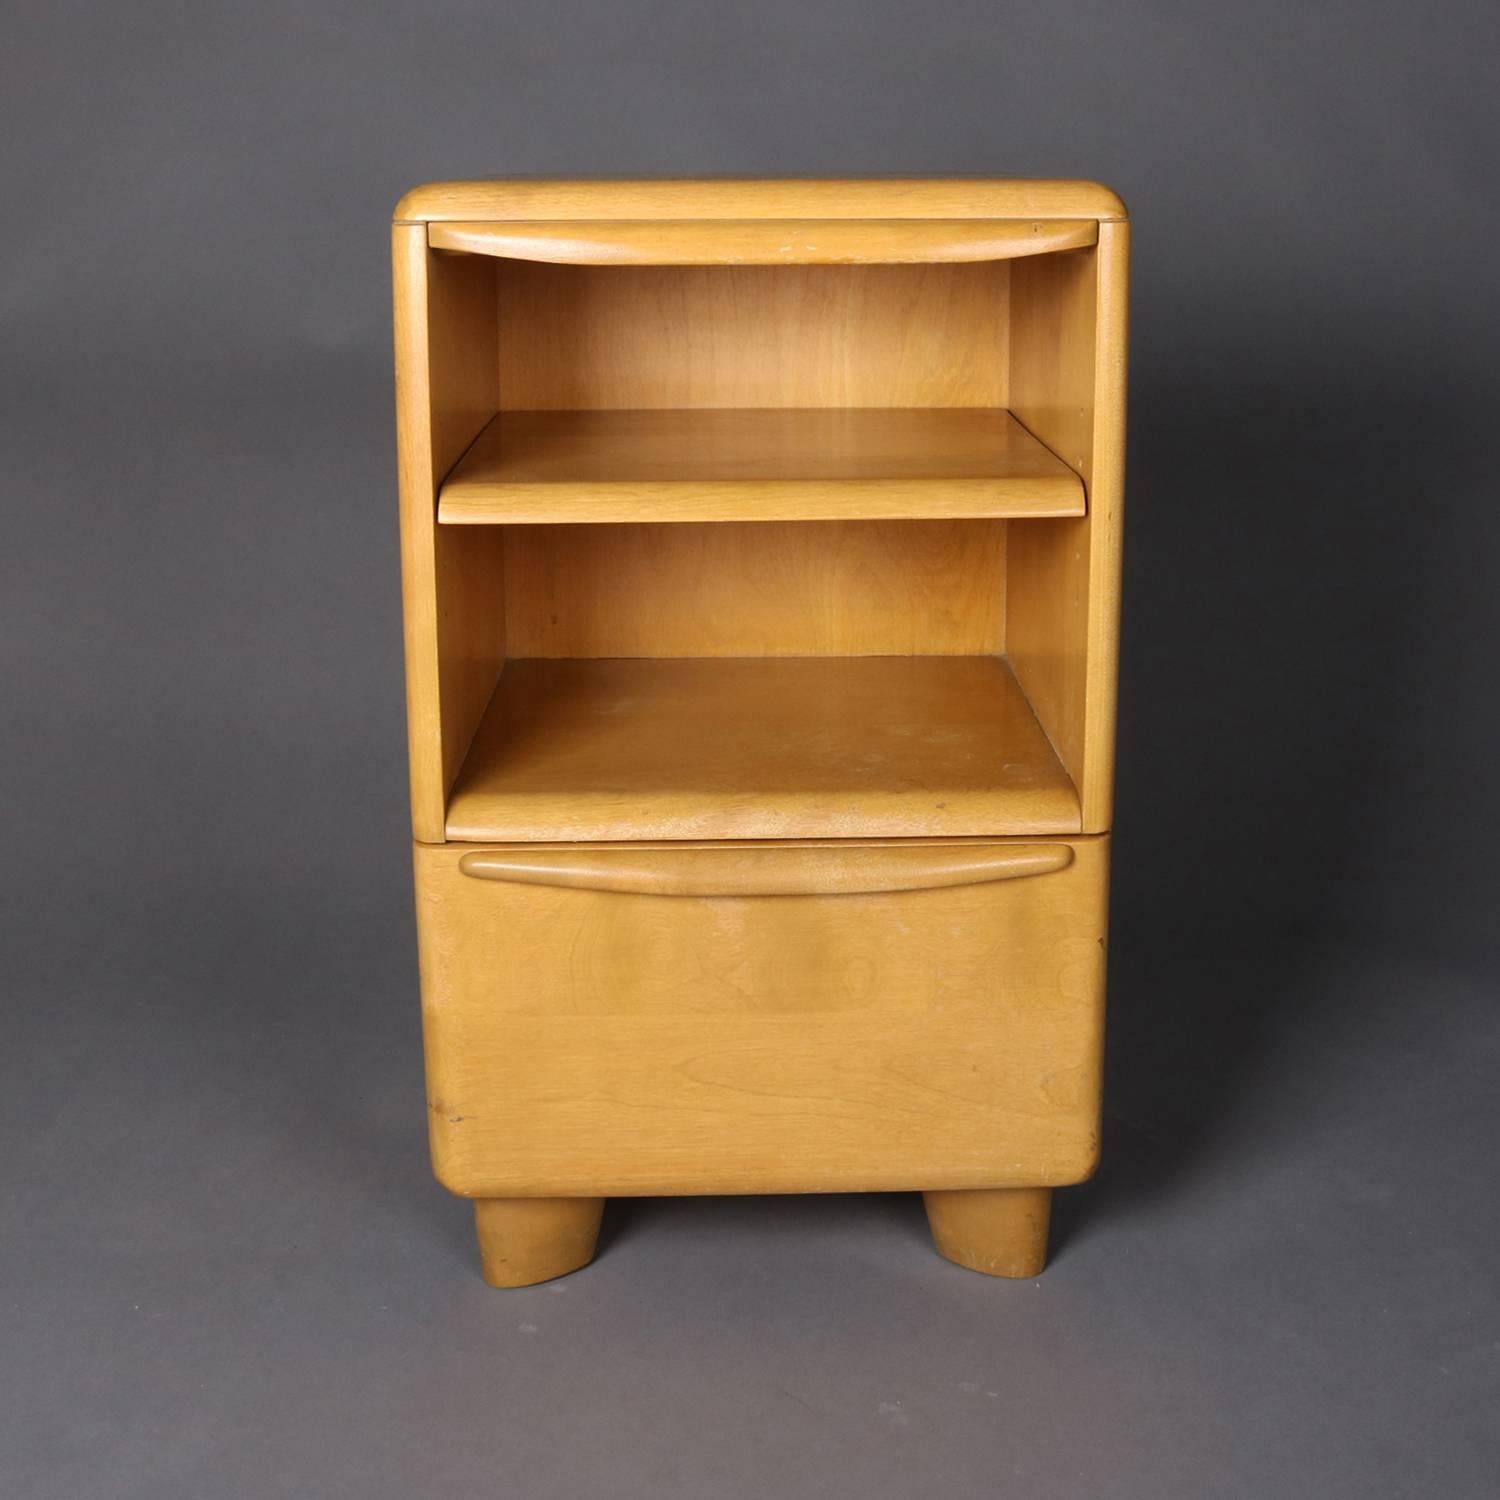 American Mid-Century Modern Heywood Wakefield Encore End Stand in Wheat, Mid-20th Century